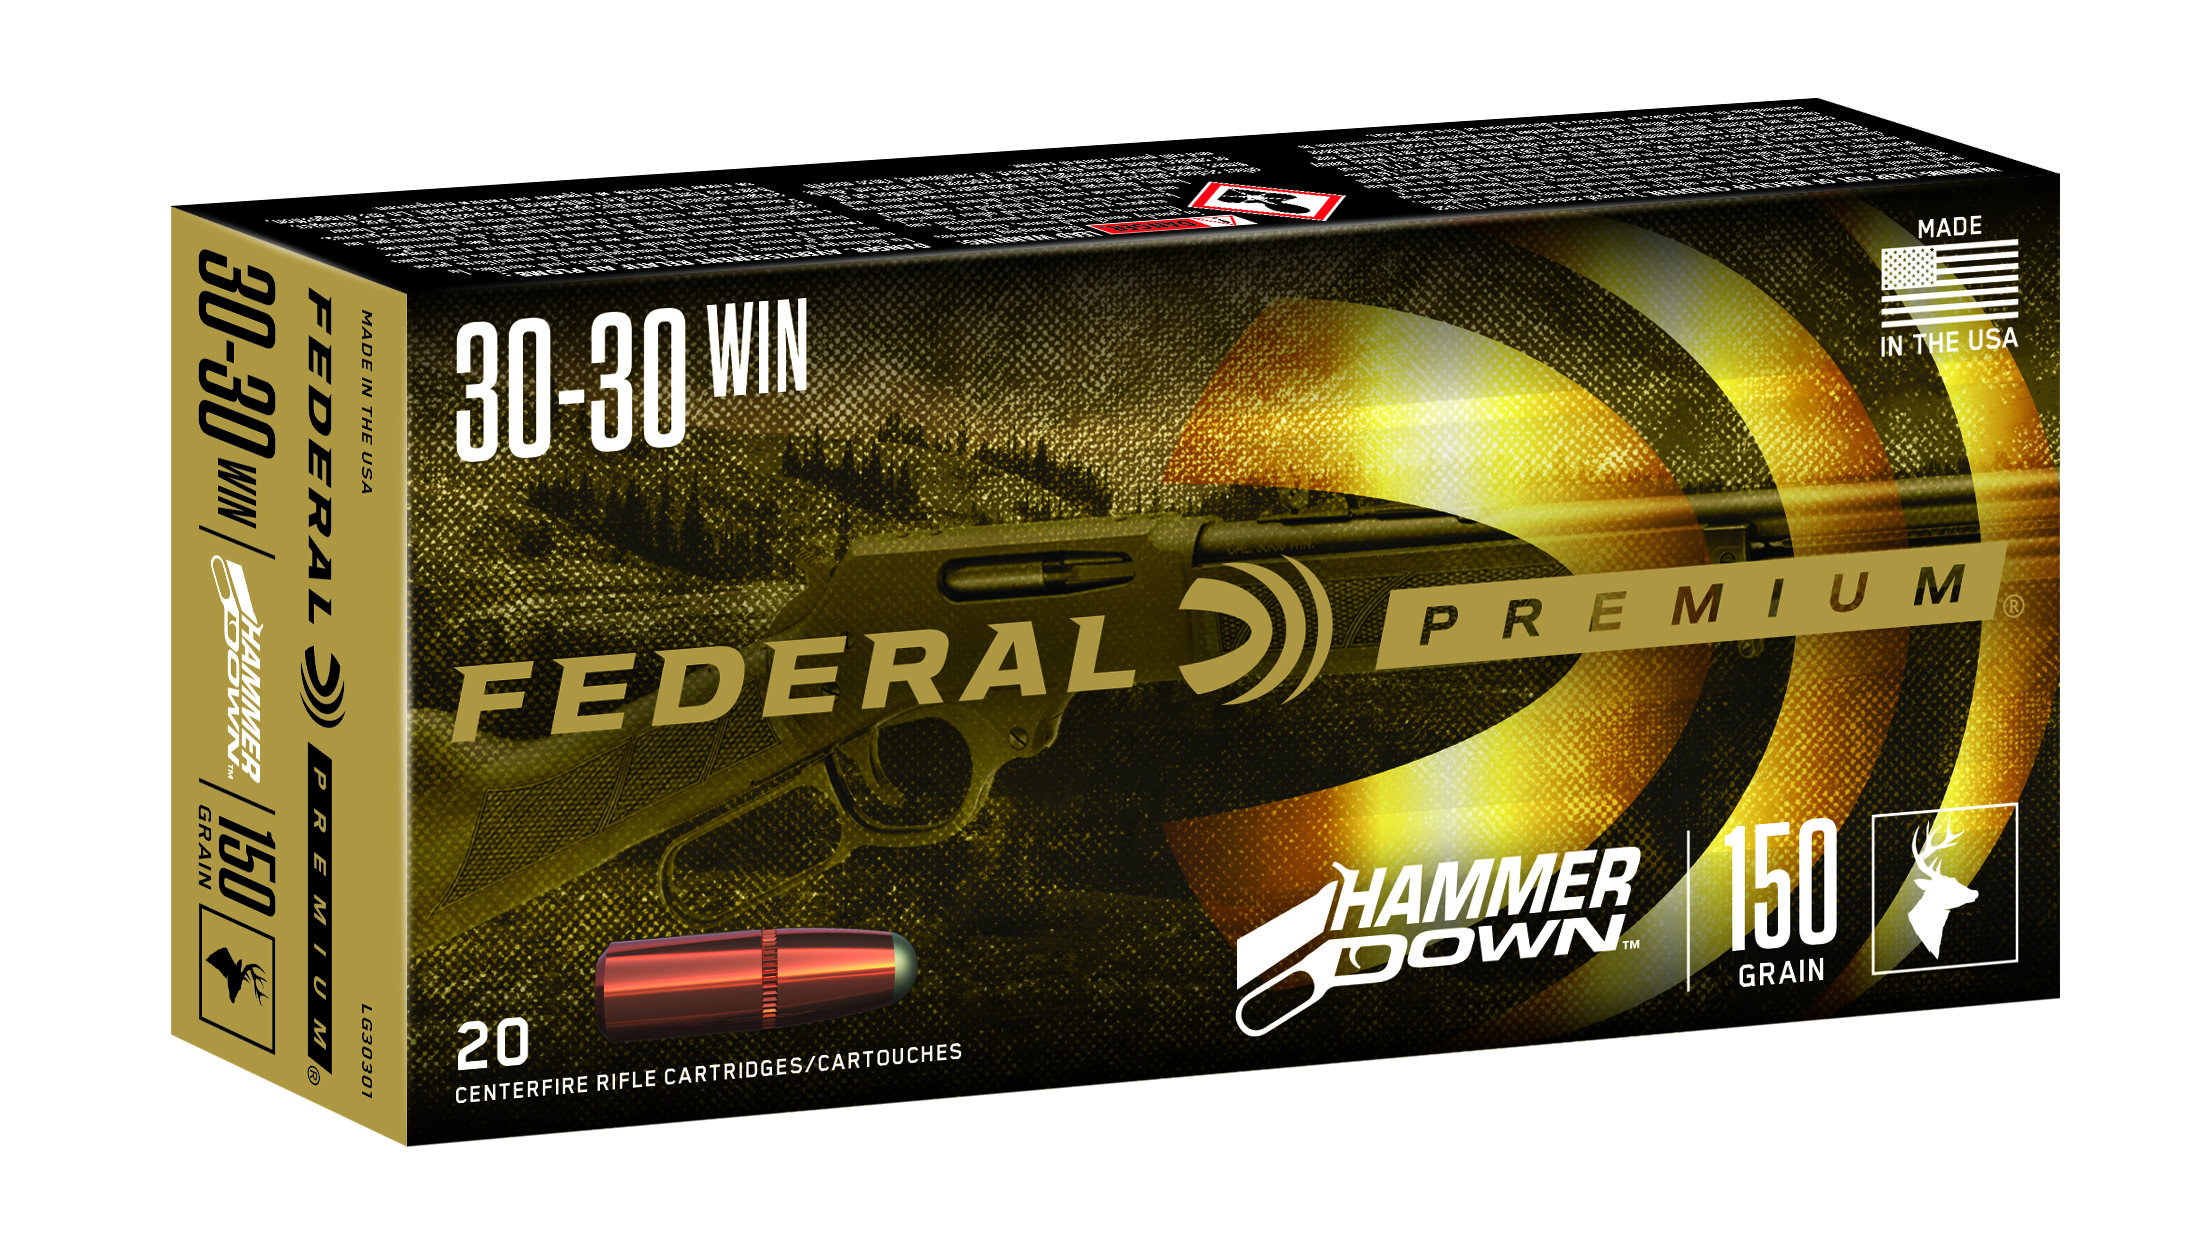 Federal's Hammer Down was built to cycle better through lever-action rifles